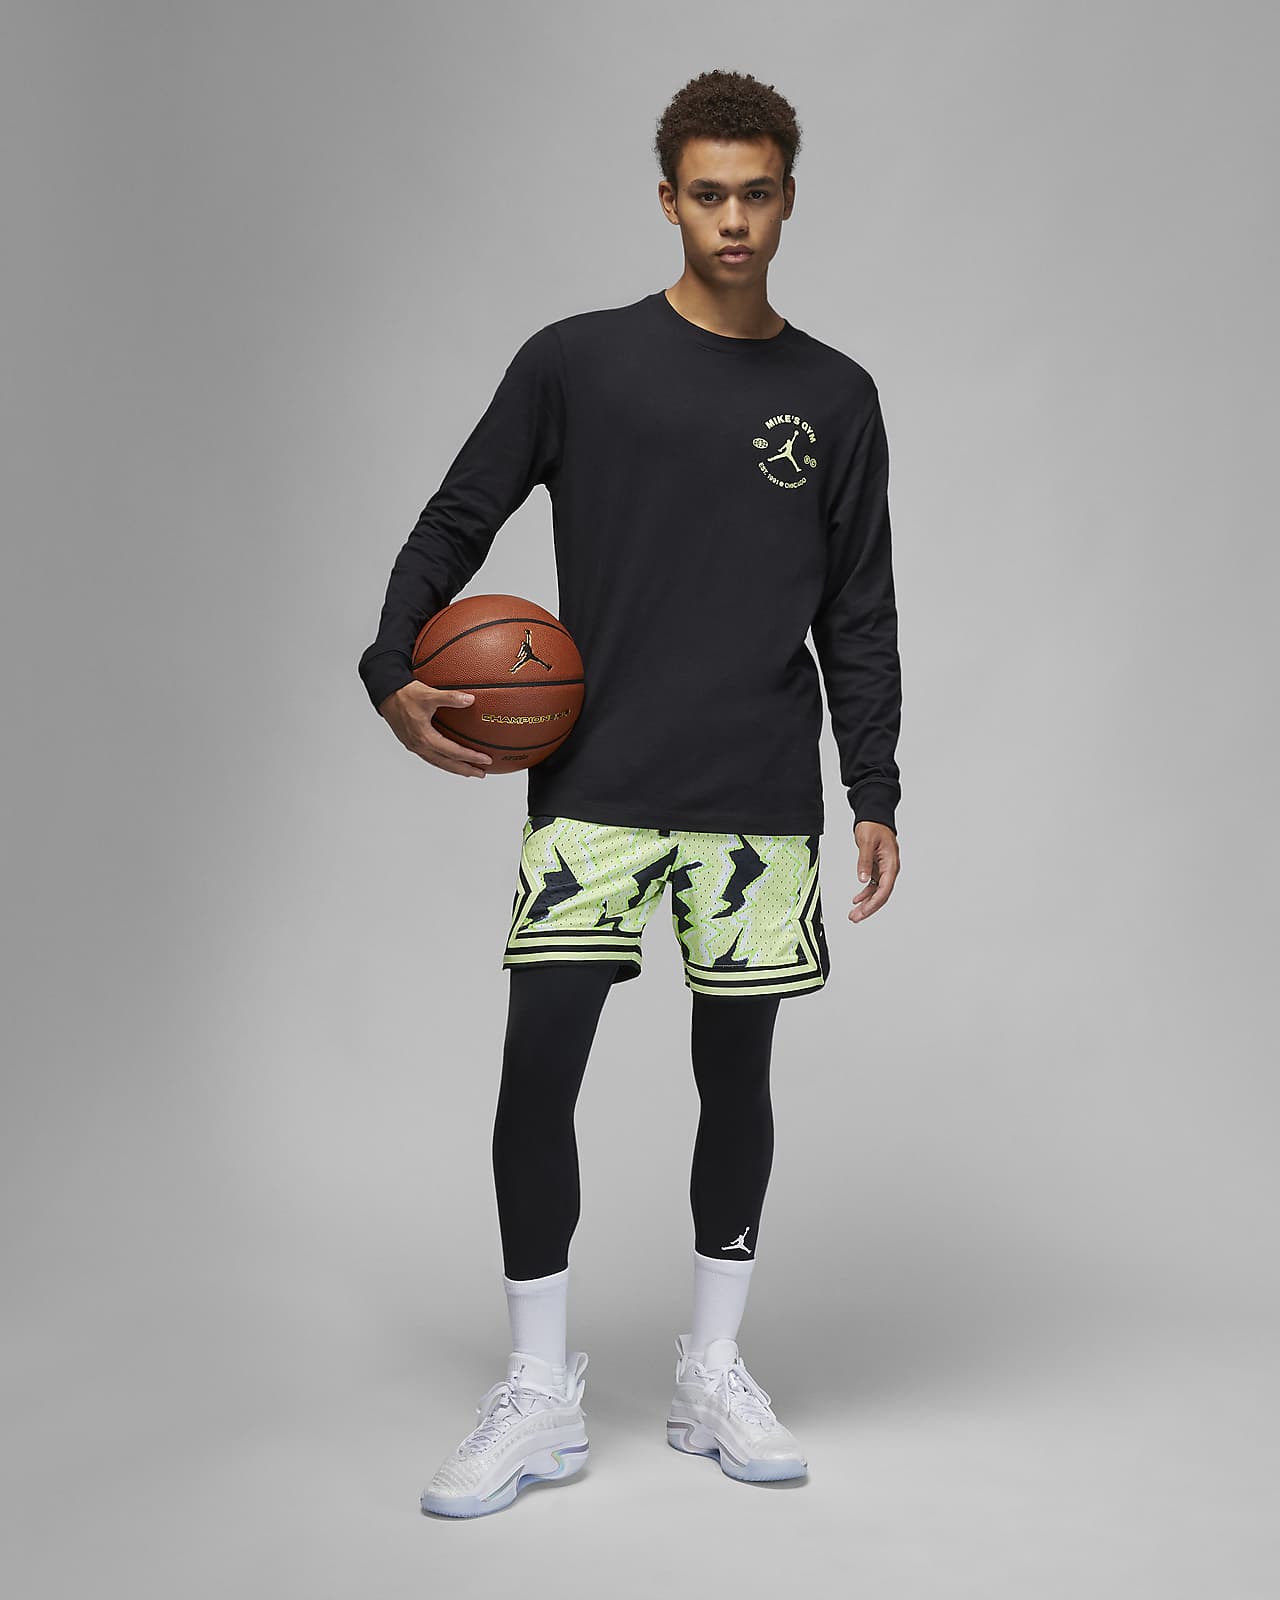 Nike Jordan Dominate Men's Tights  Sport outfits, Mens tights, Mens  workout clothes